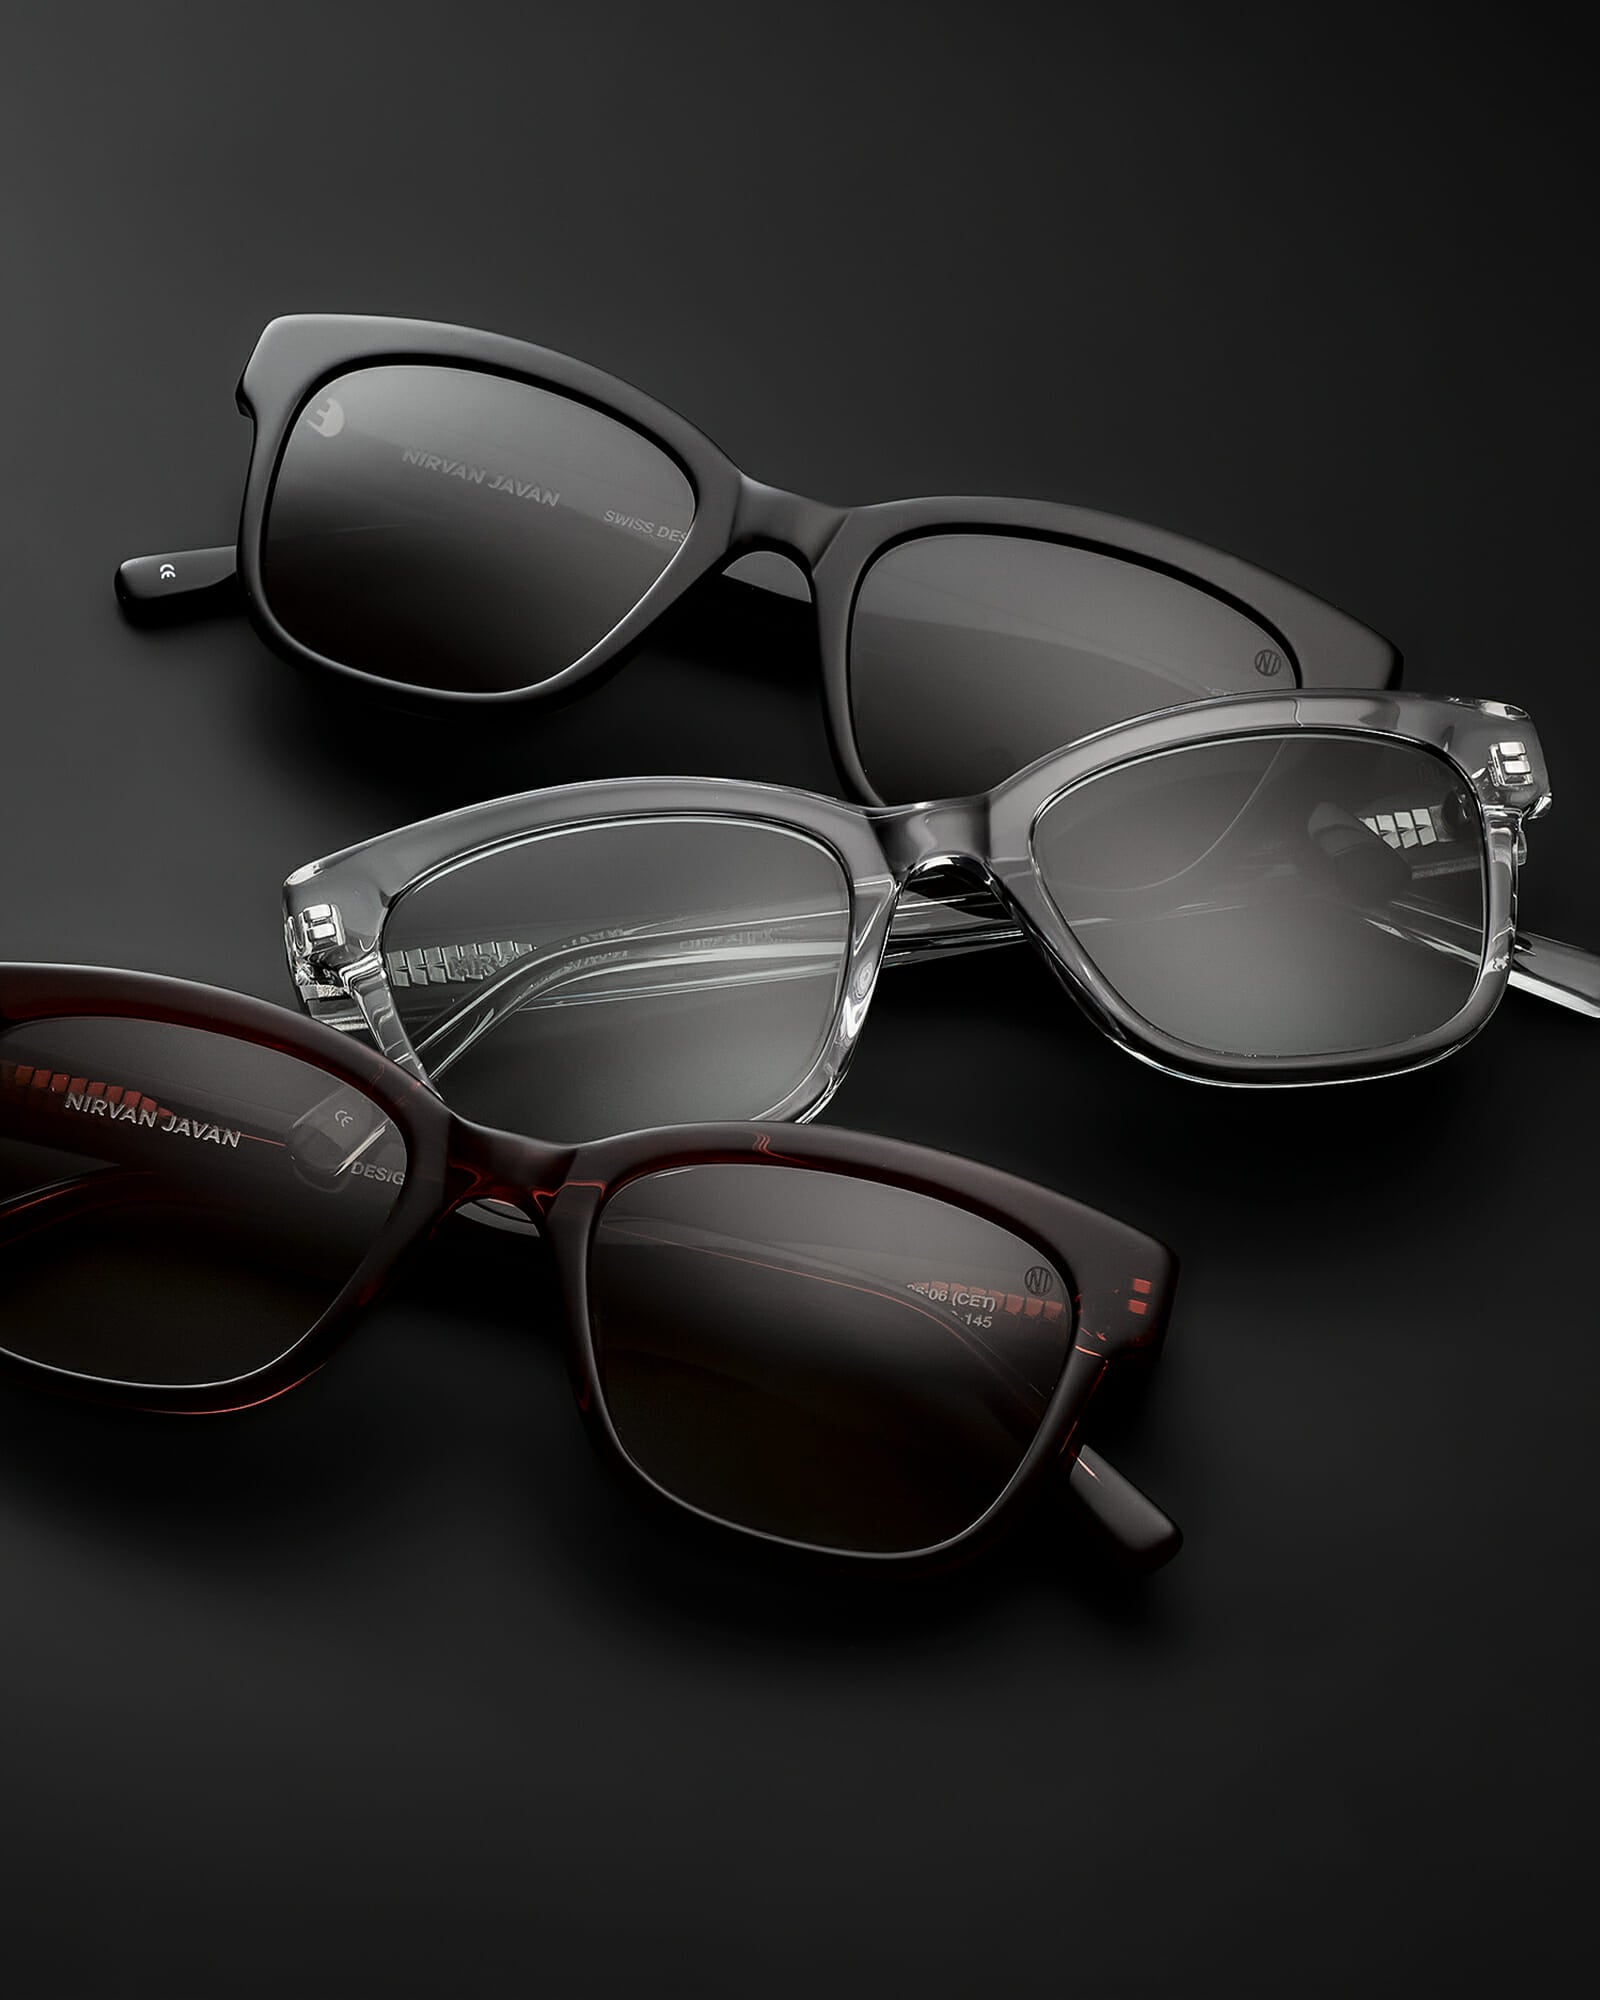 Three cat eye acetat shades, one in black with grey lenses, one in brown with brown lenses and one in transparent with grey lenses on a black background, the frames are folded